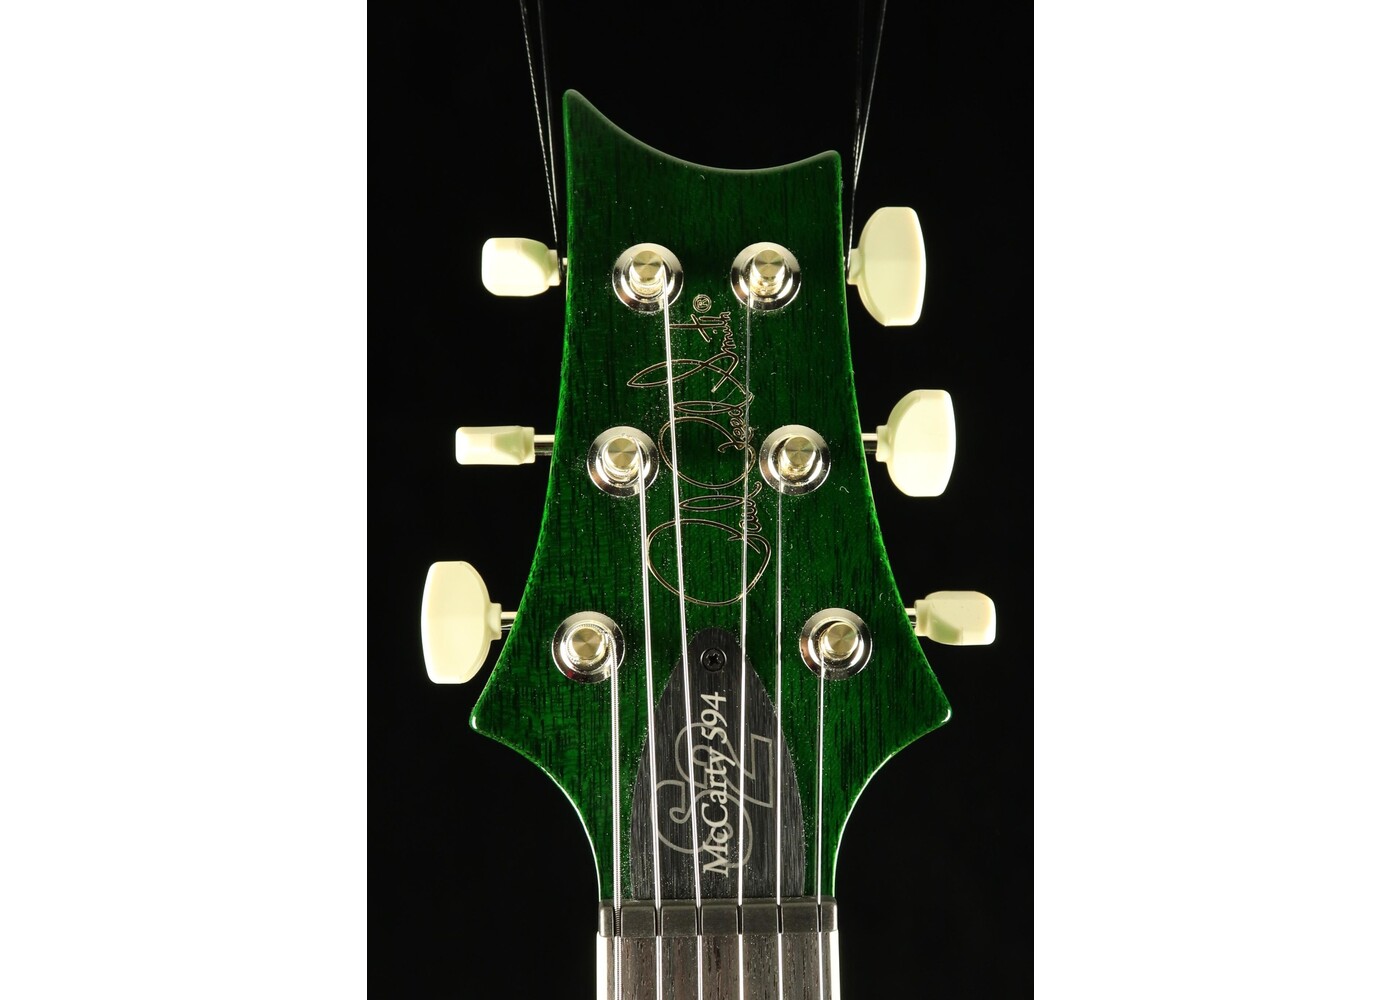 PRS Guitars PRS Limited Run S2 McCarty 594 Electric Guitar - Quilt Emerald Green